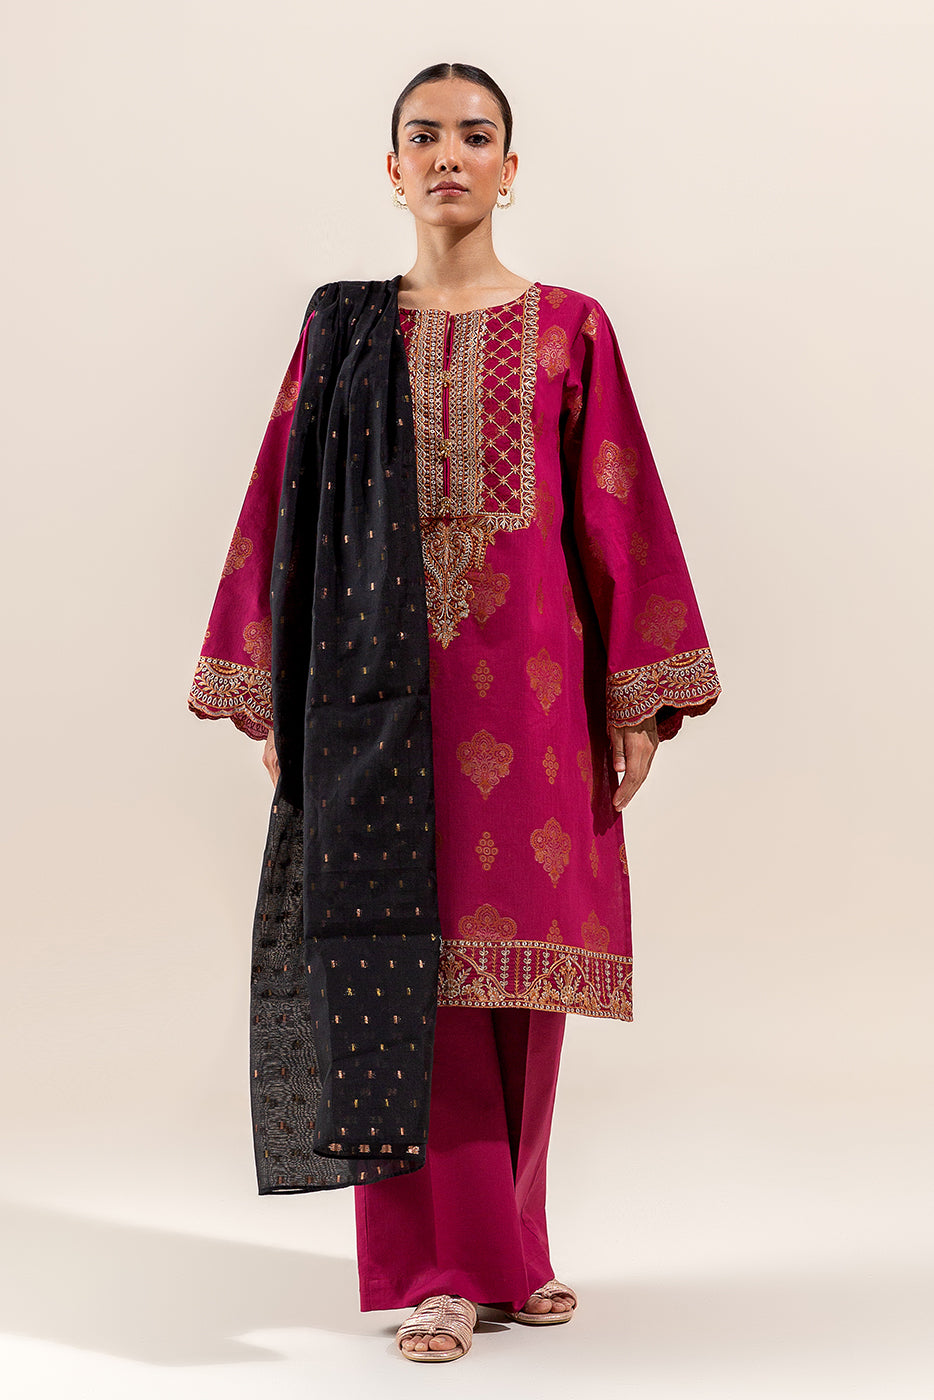 3 PIECE EMBROIDERED JACQUARD SUIT-FUSCHIA GLOOM (UNSTITCHED)